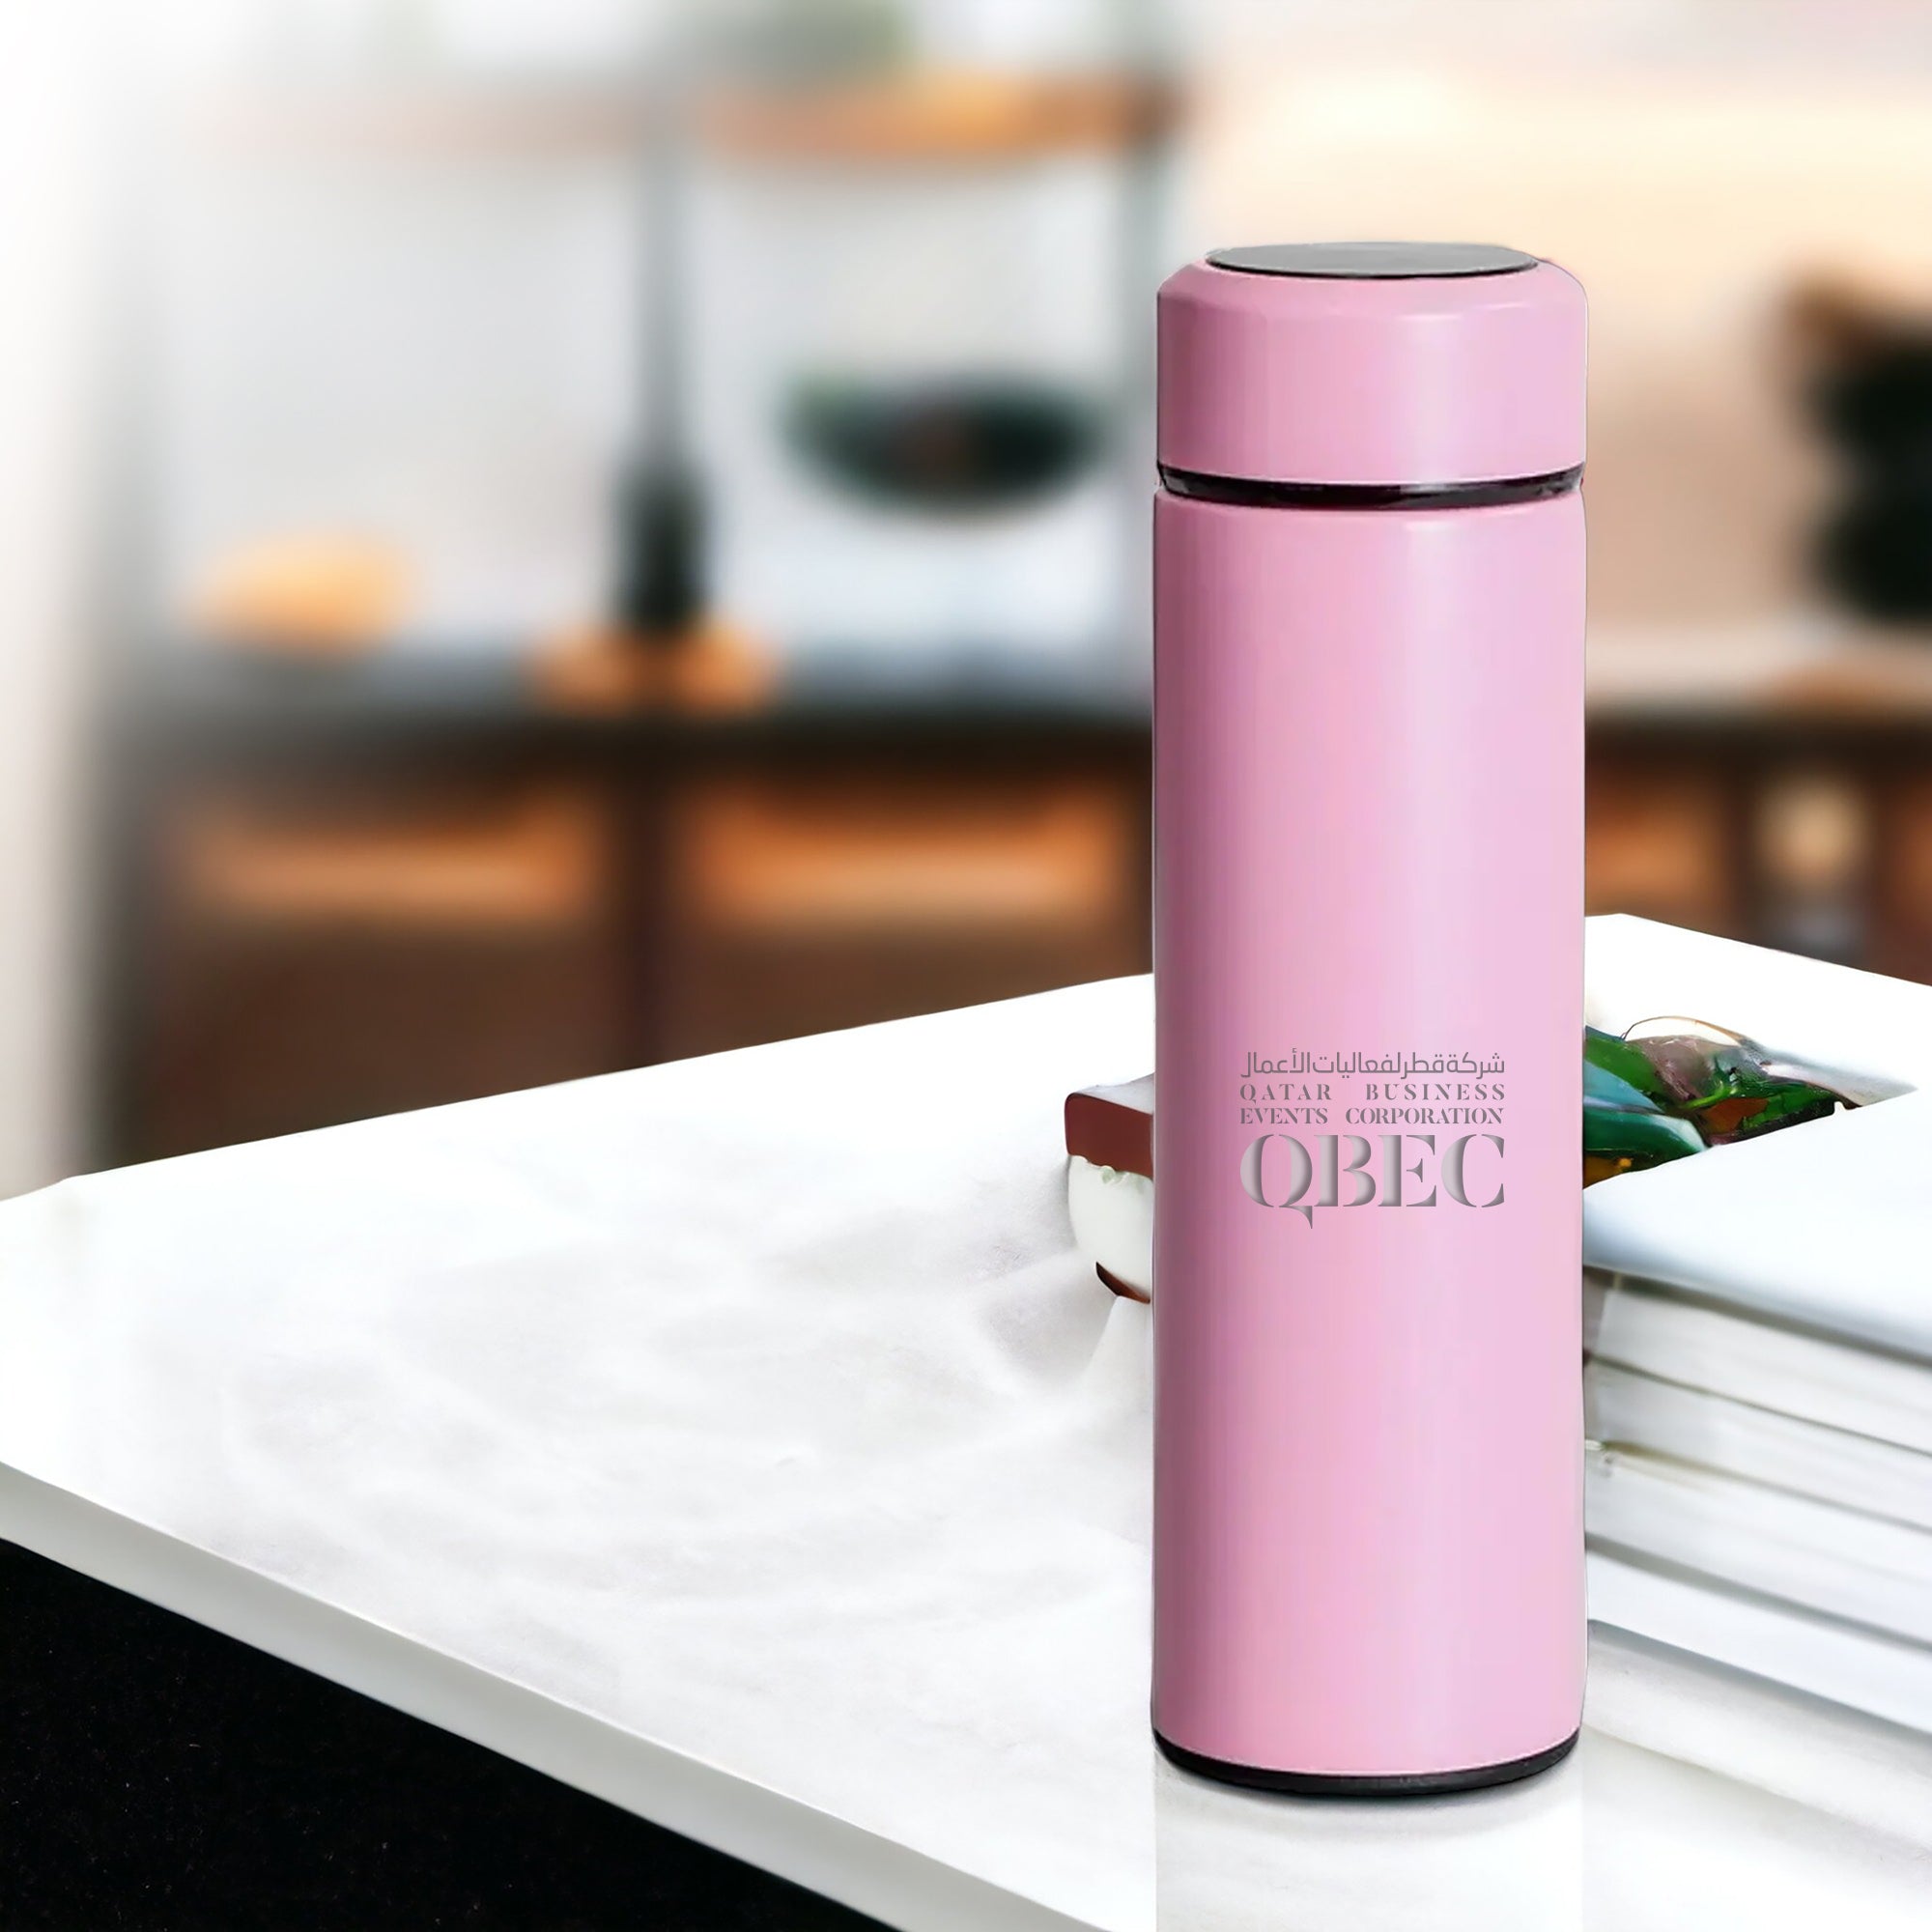 Digital LED Stainless Steel Thermos Water Bottle